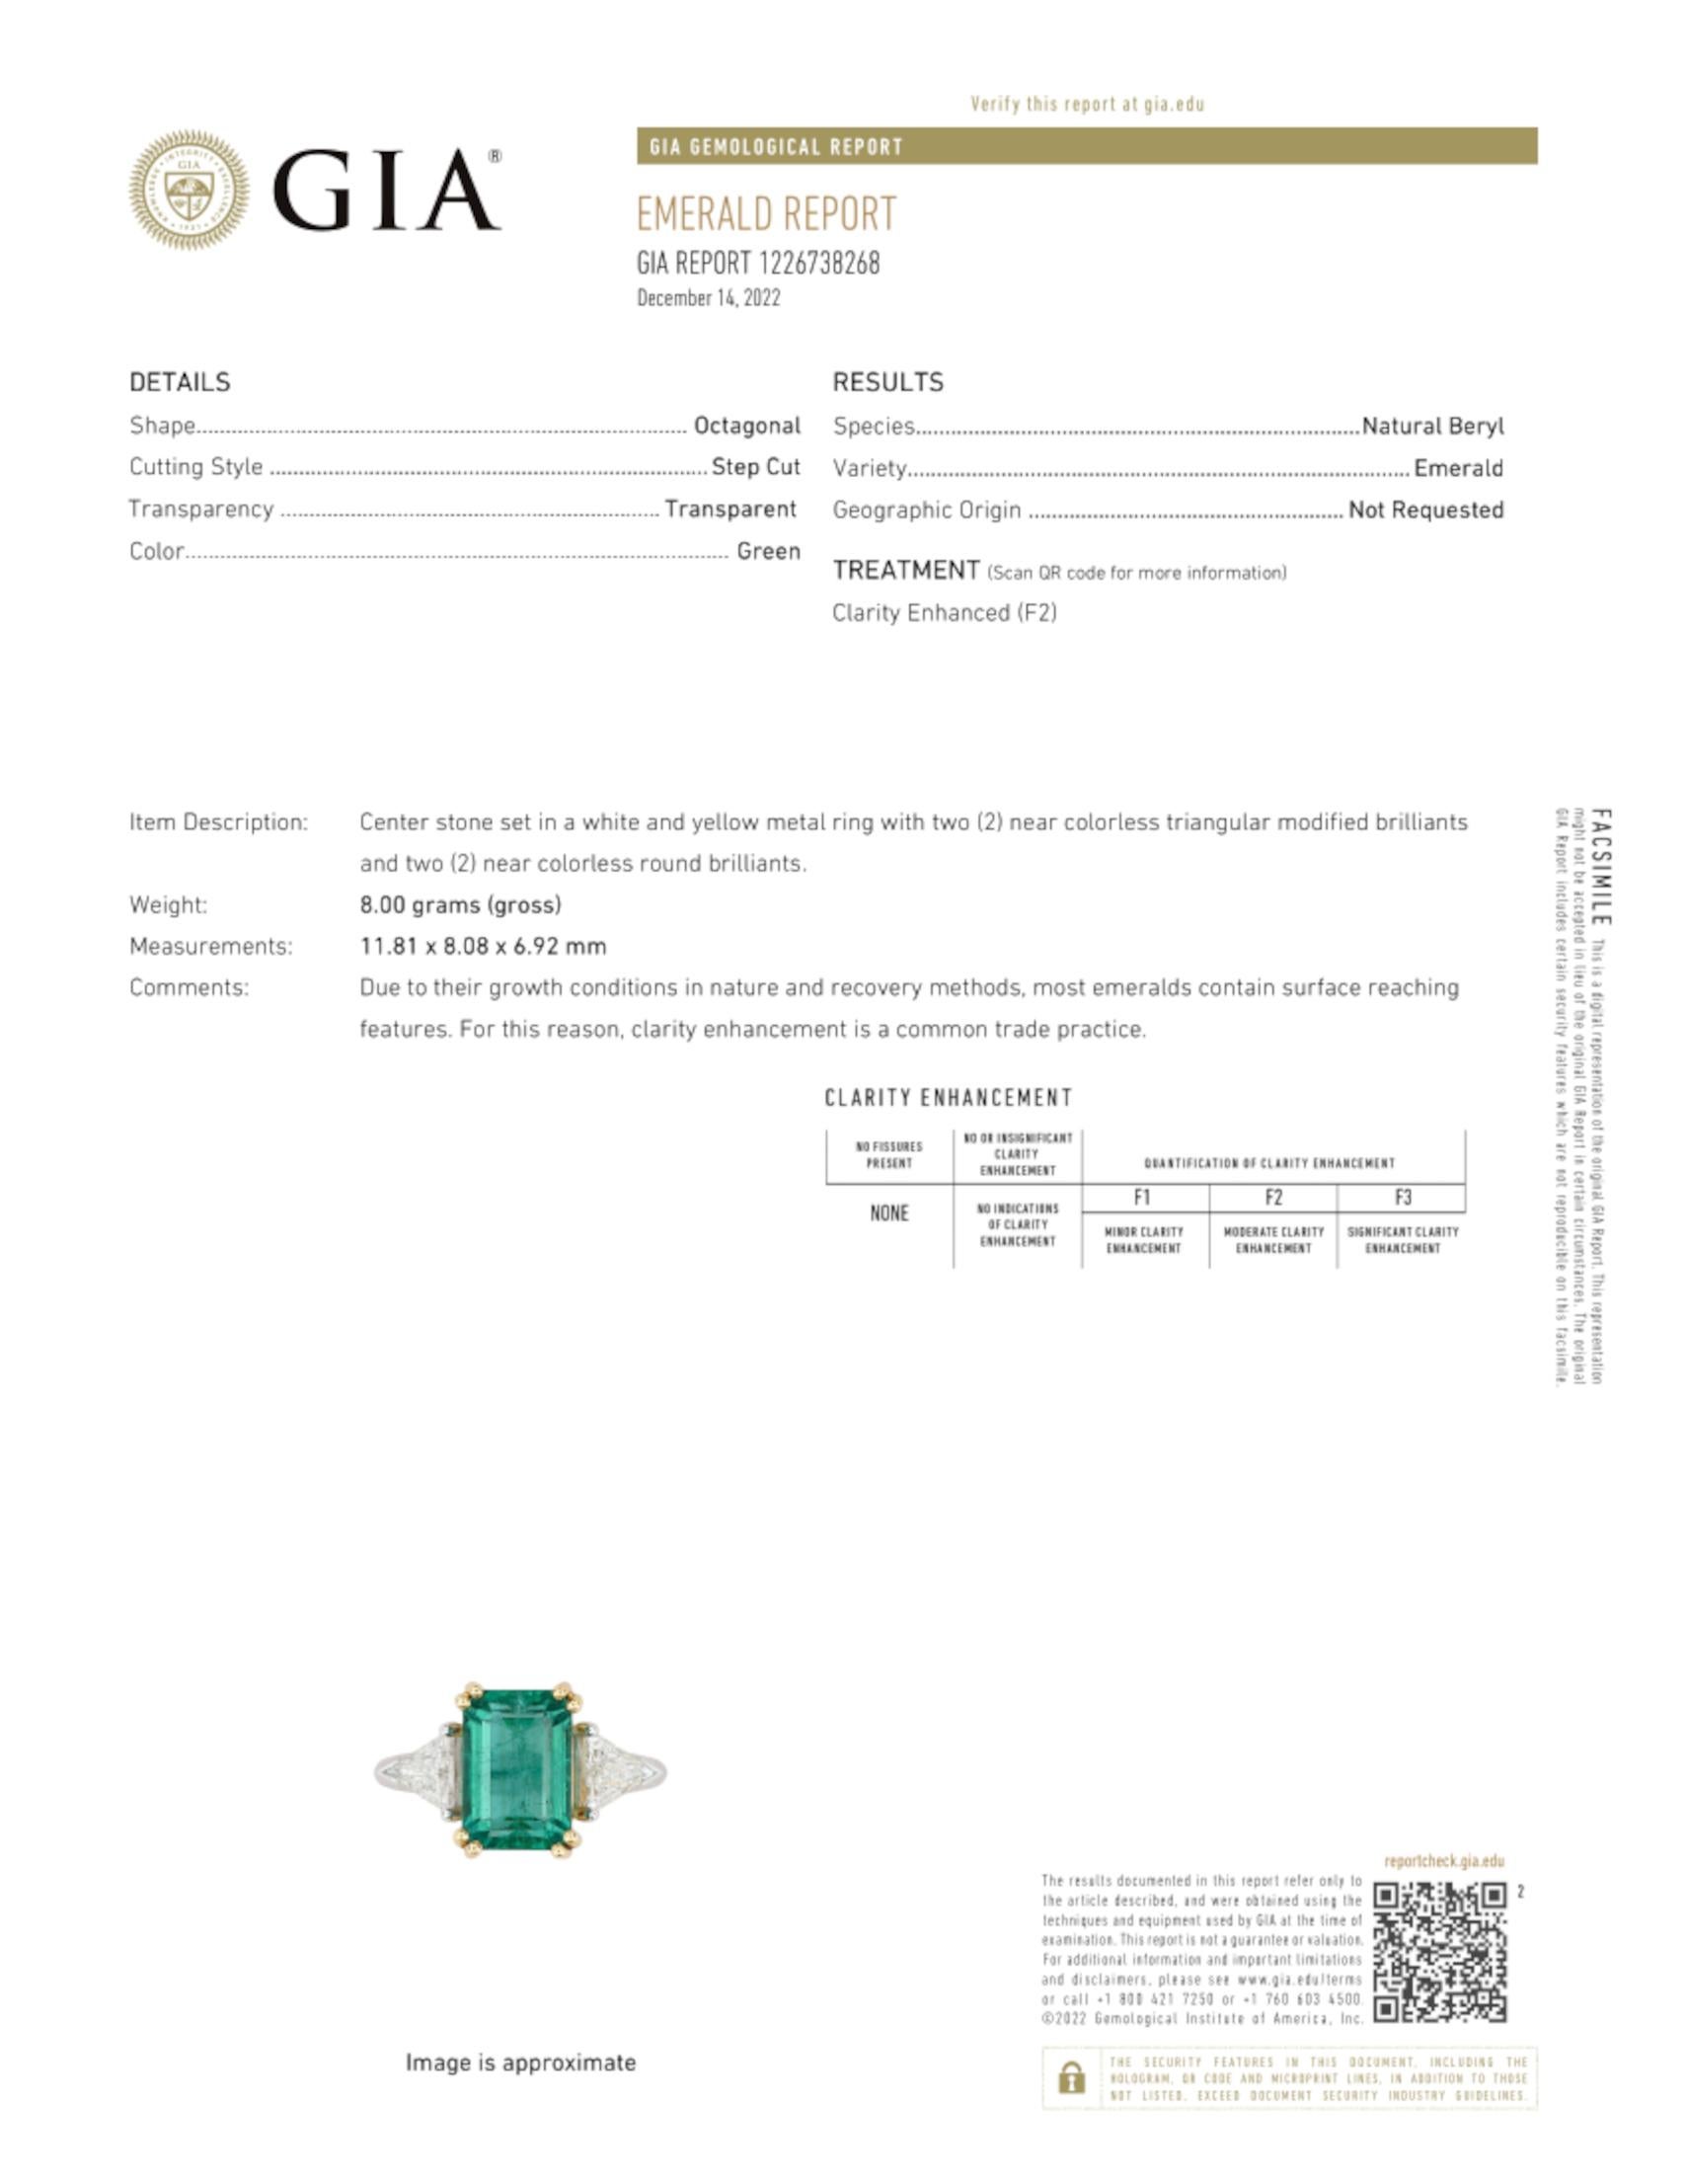 Showcasing an exquisite investment grade emerald cut green natural emerald certified by IGI Antwerp with top color and top clarity.

Based on emerald grading methodology the clarity of the emerald is very rare with practically no imperfections